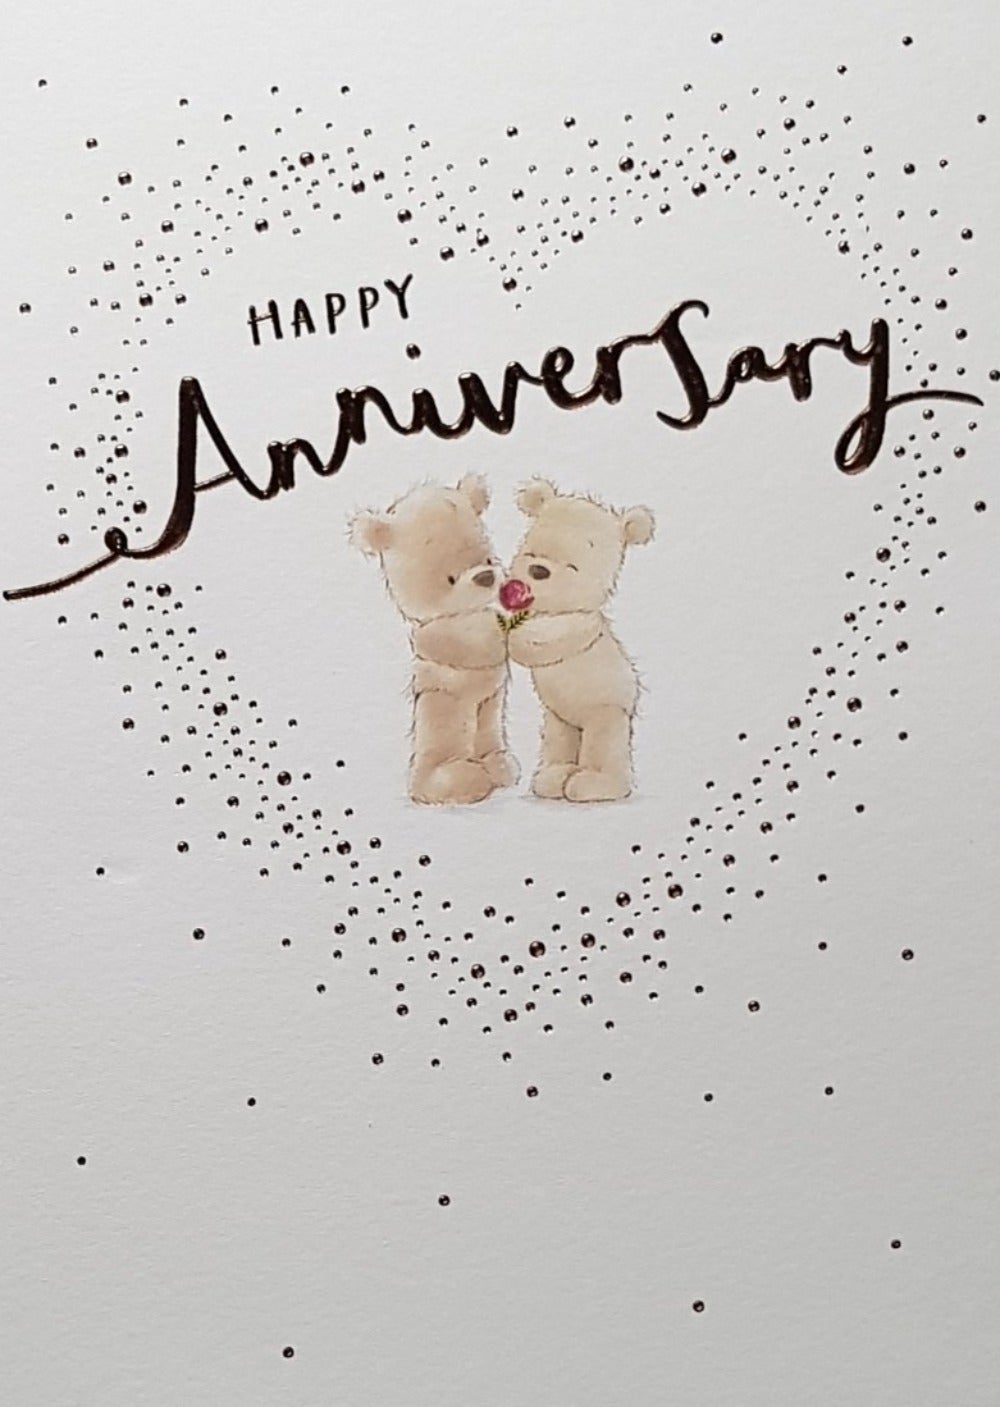 Anniversary Card - Couple Of Cute Teddies Inside Of A Spotted Heart